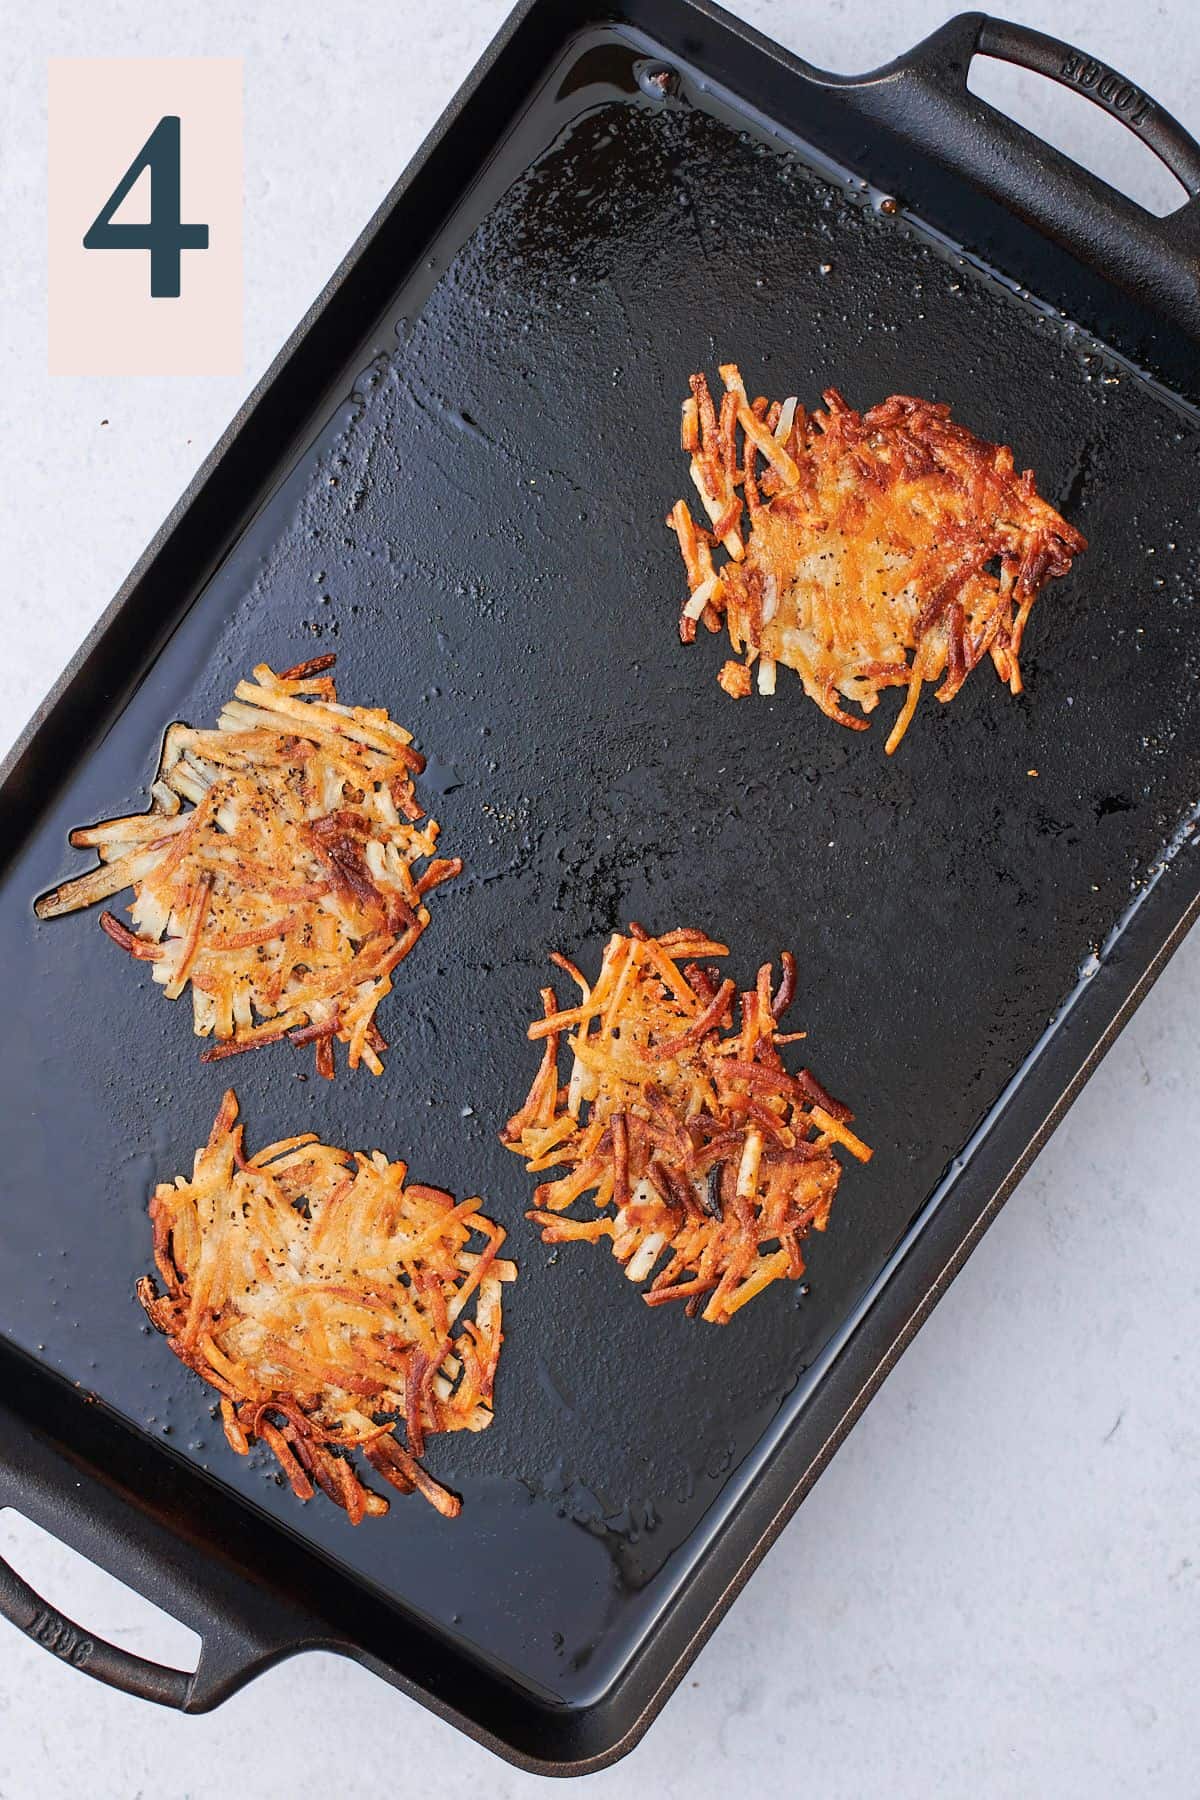 cooked crispy and golden brown hash brown rounds on a griddle. 